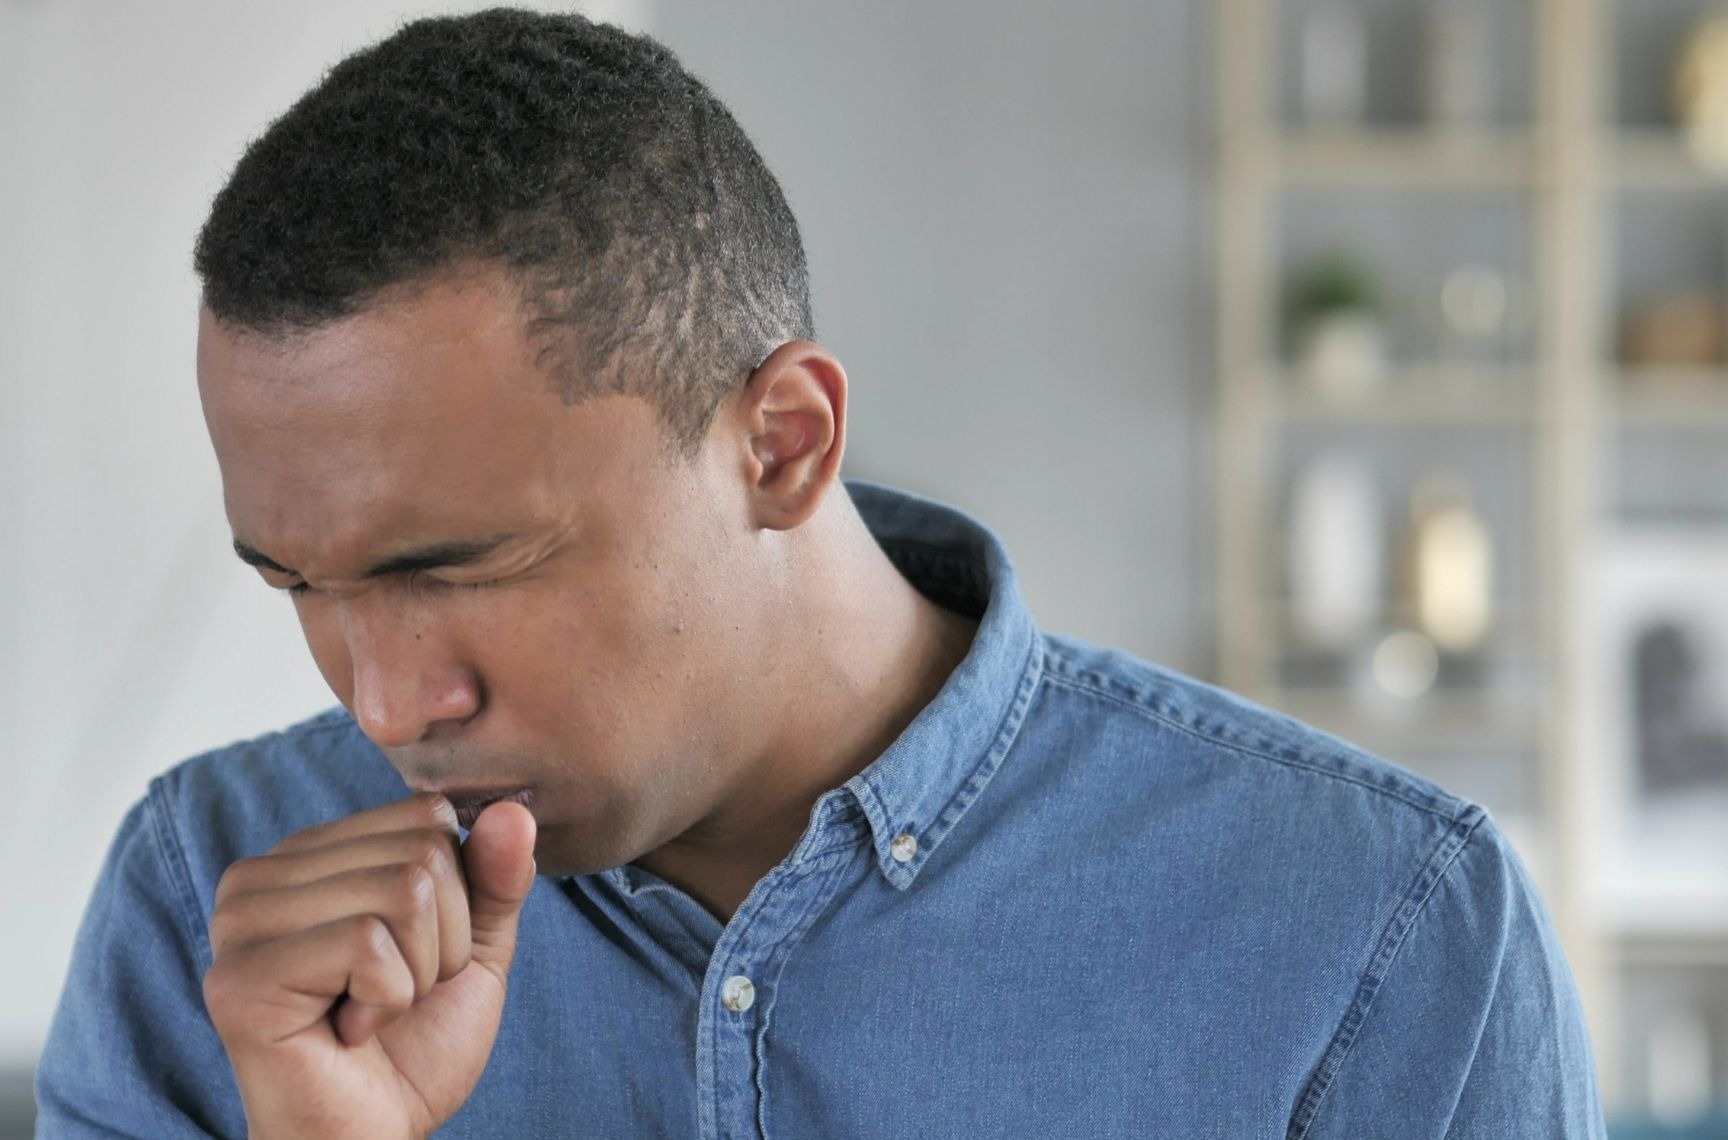 Does a Humidifier Help with Coughing?